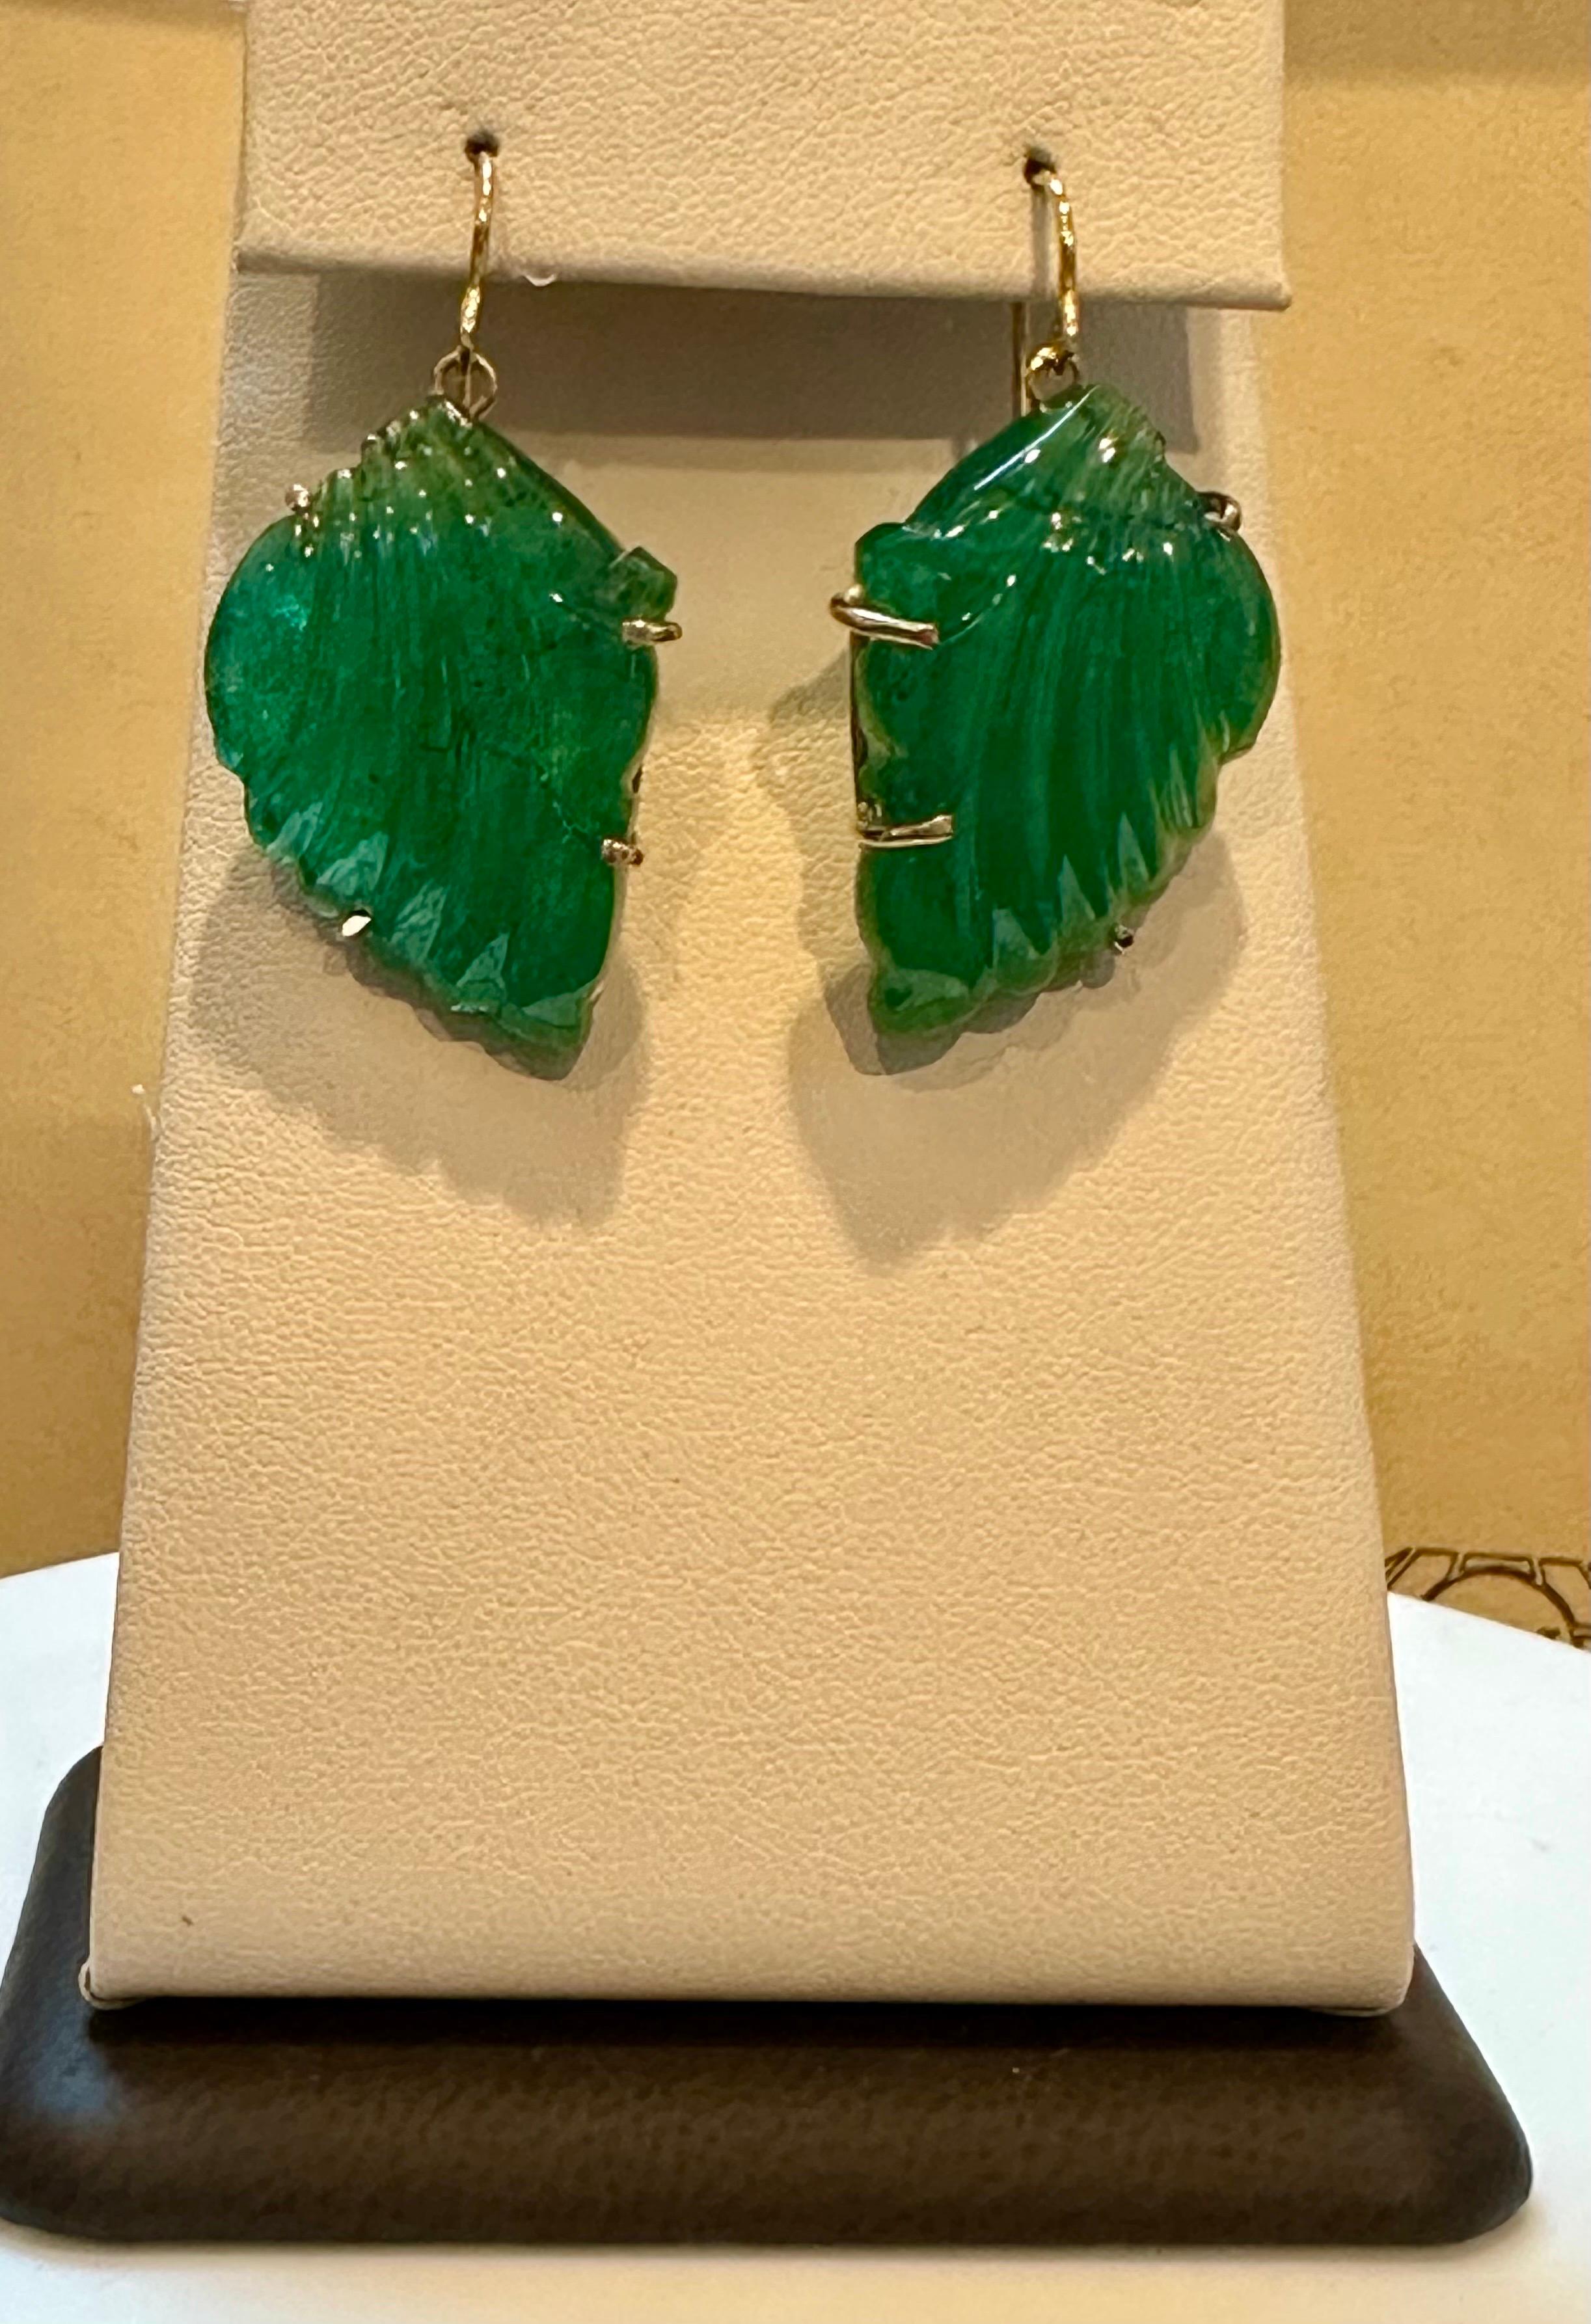 55 Ct Carved Emerald Leaf Shape Earrings 14 Kt Yellow Gold French Wire Earring For Sale 1